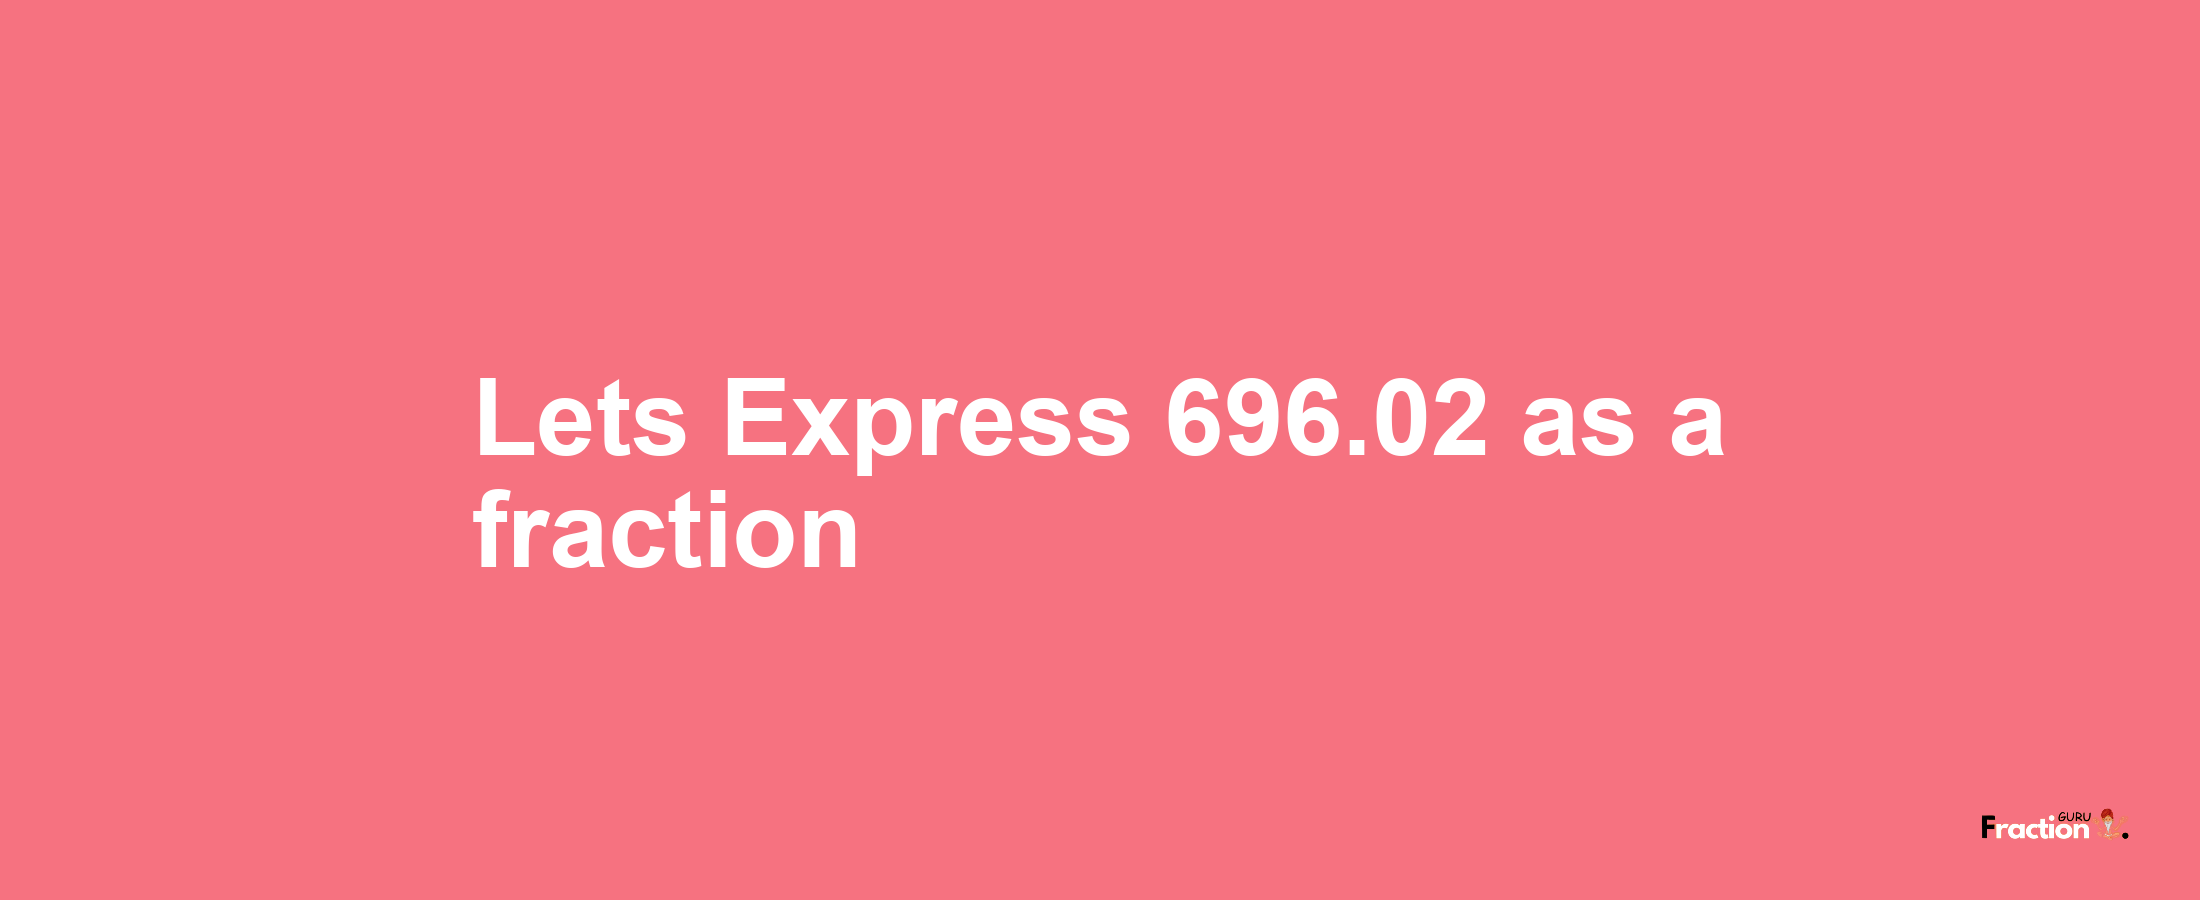 Lets Express 696.02 as afraction